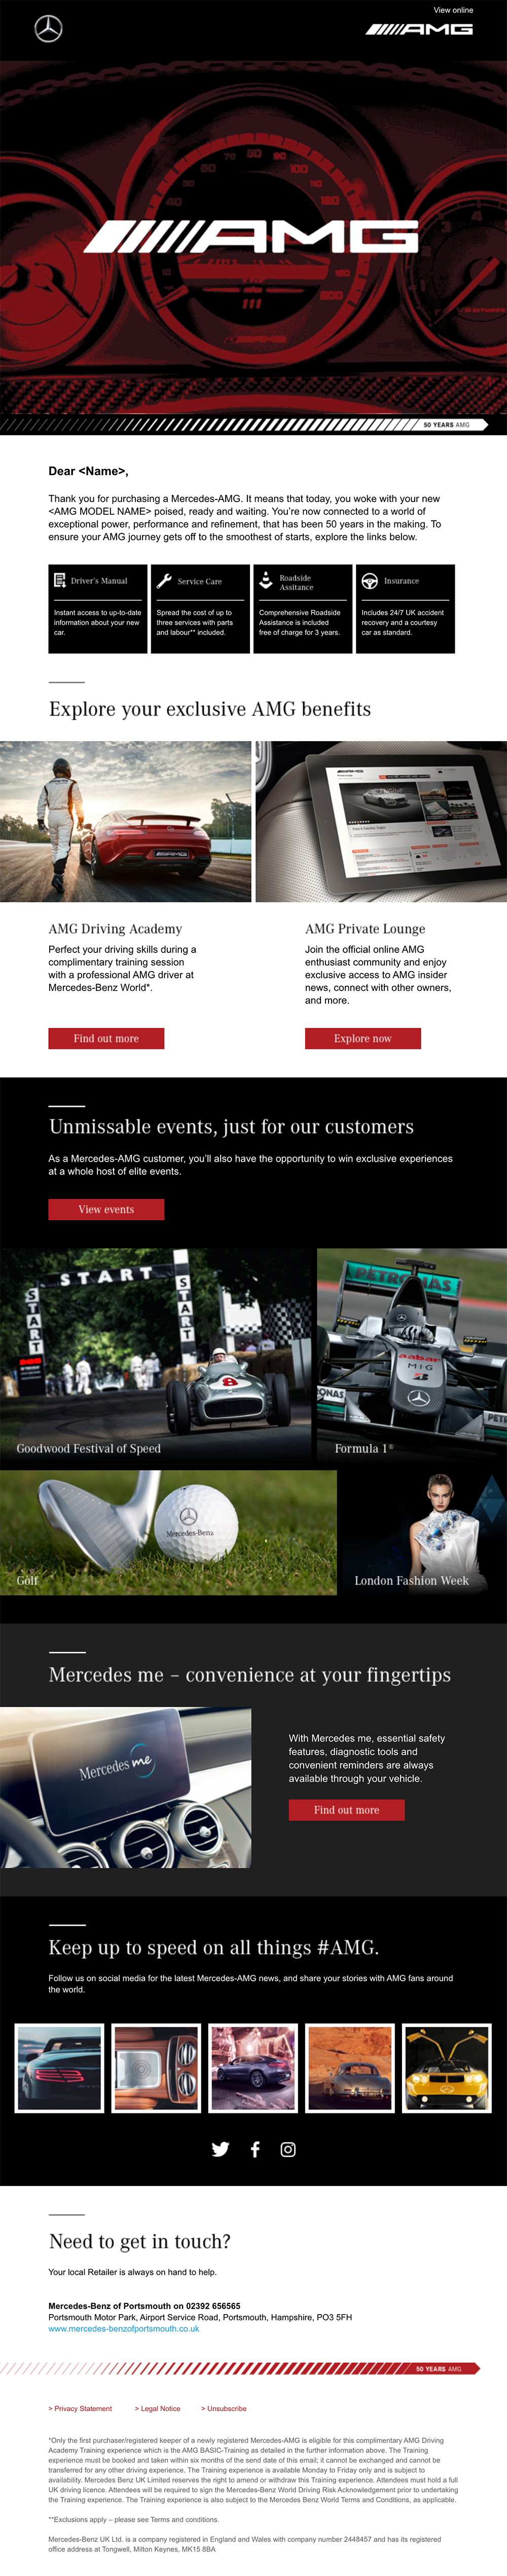 Mercedes-Benz email example